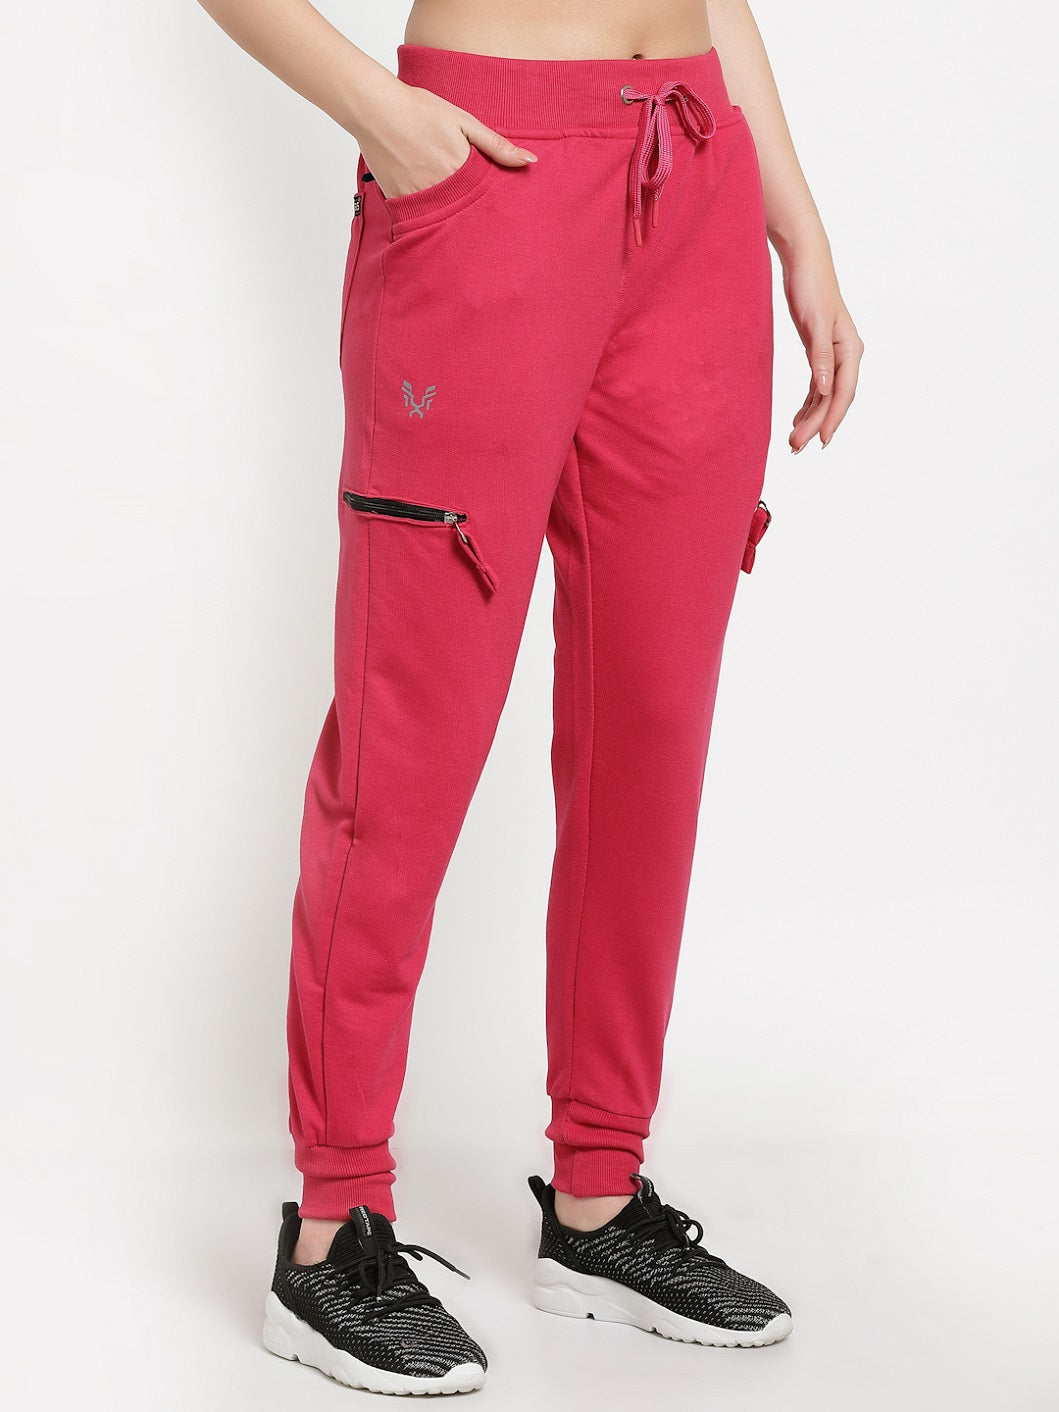 Women's Cotton Slim Fit Cargo Joggers Track Pants with 4 Zippered Pockets